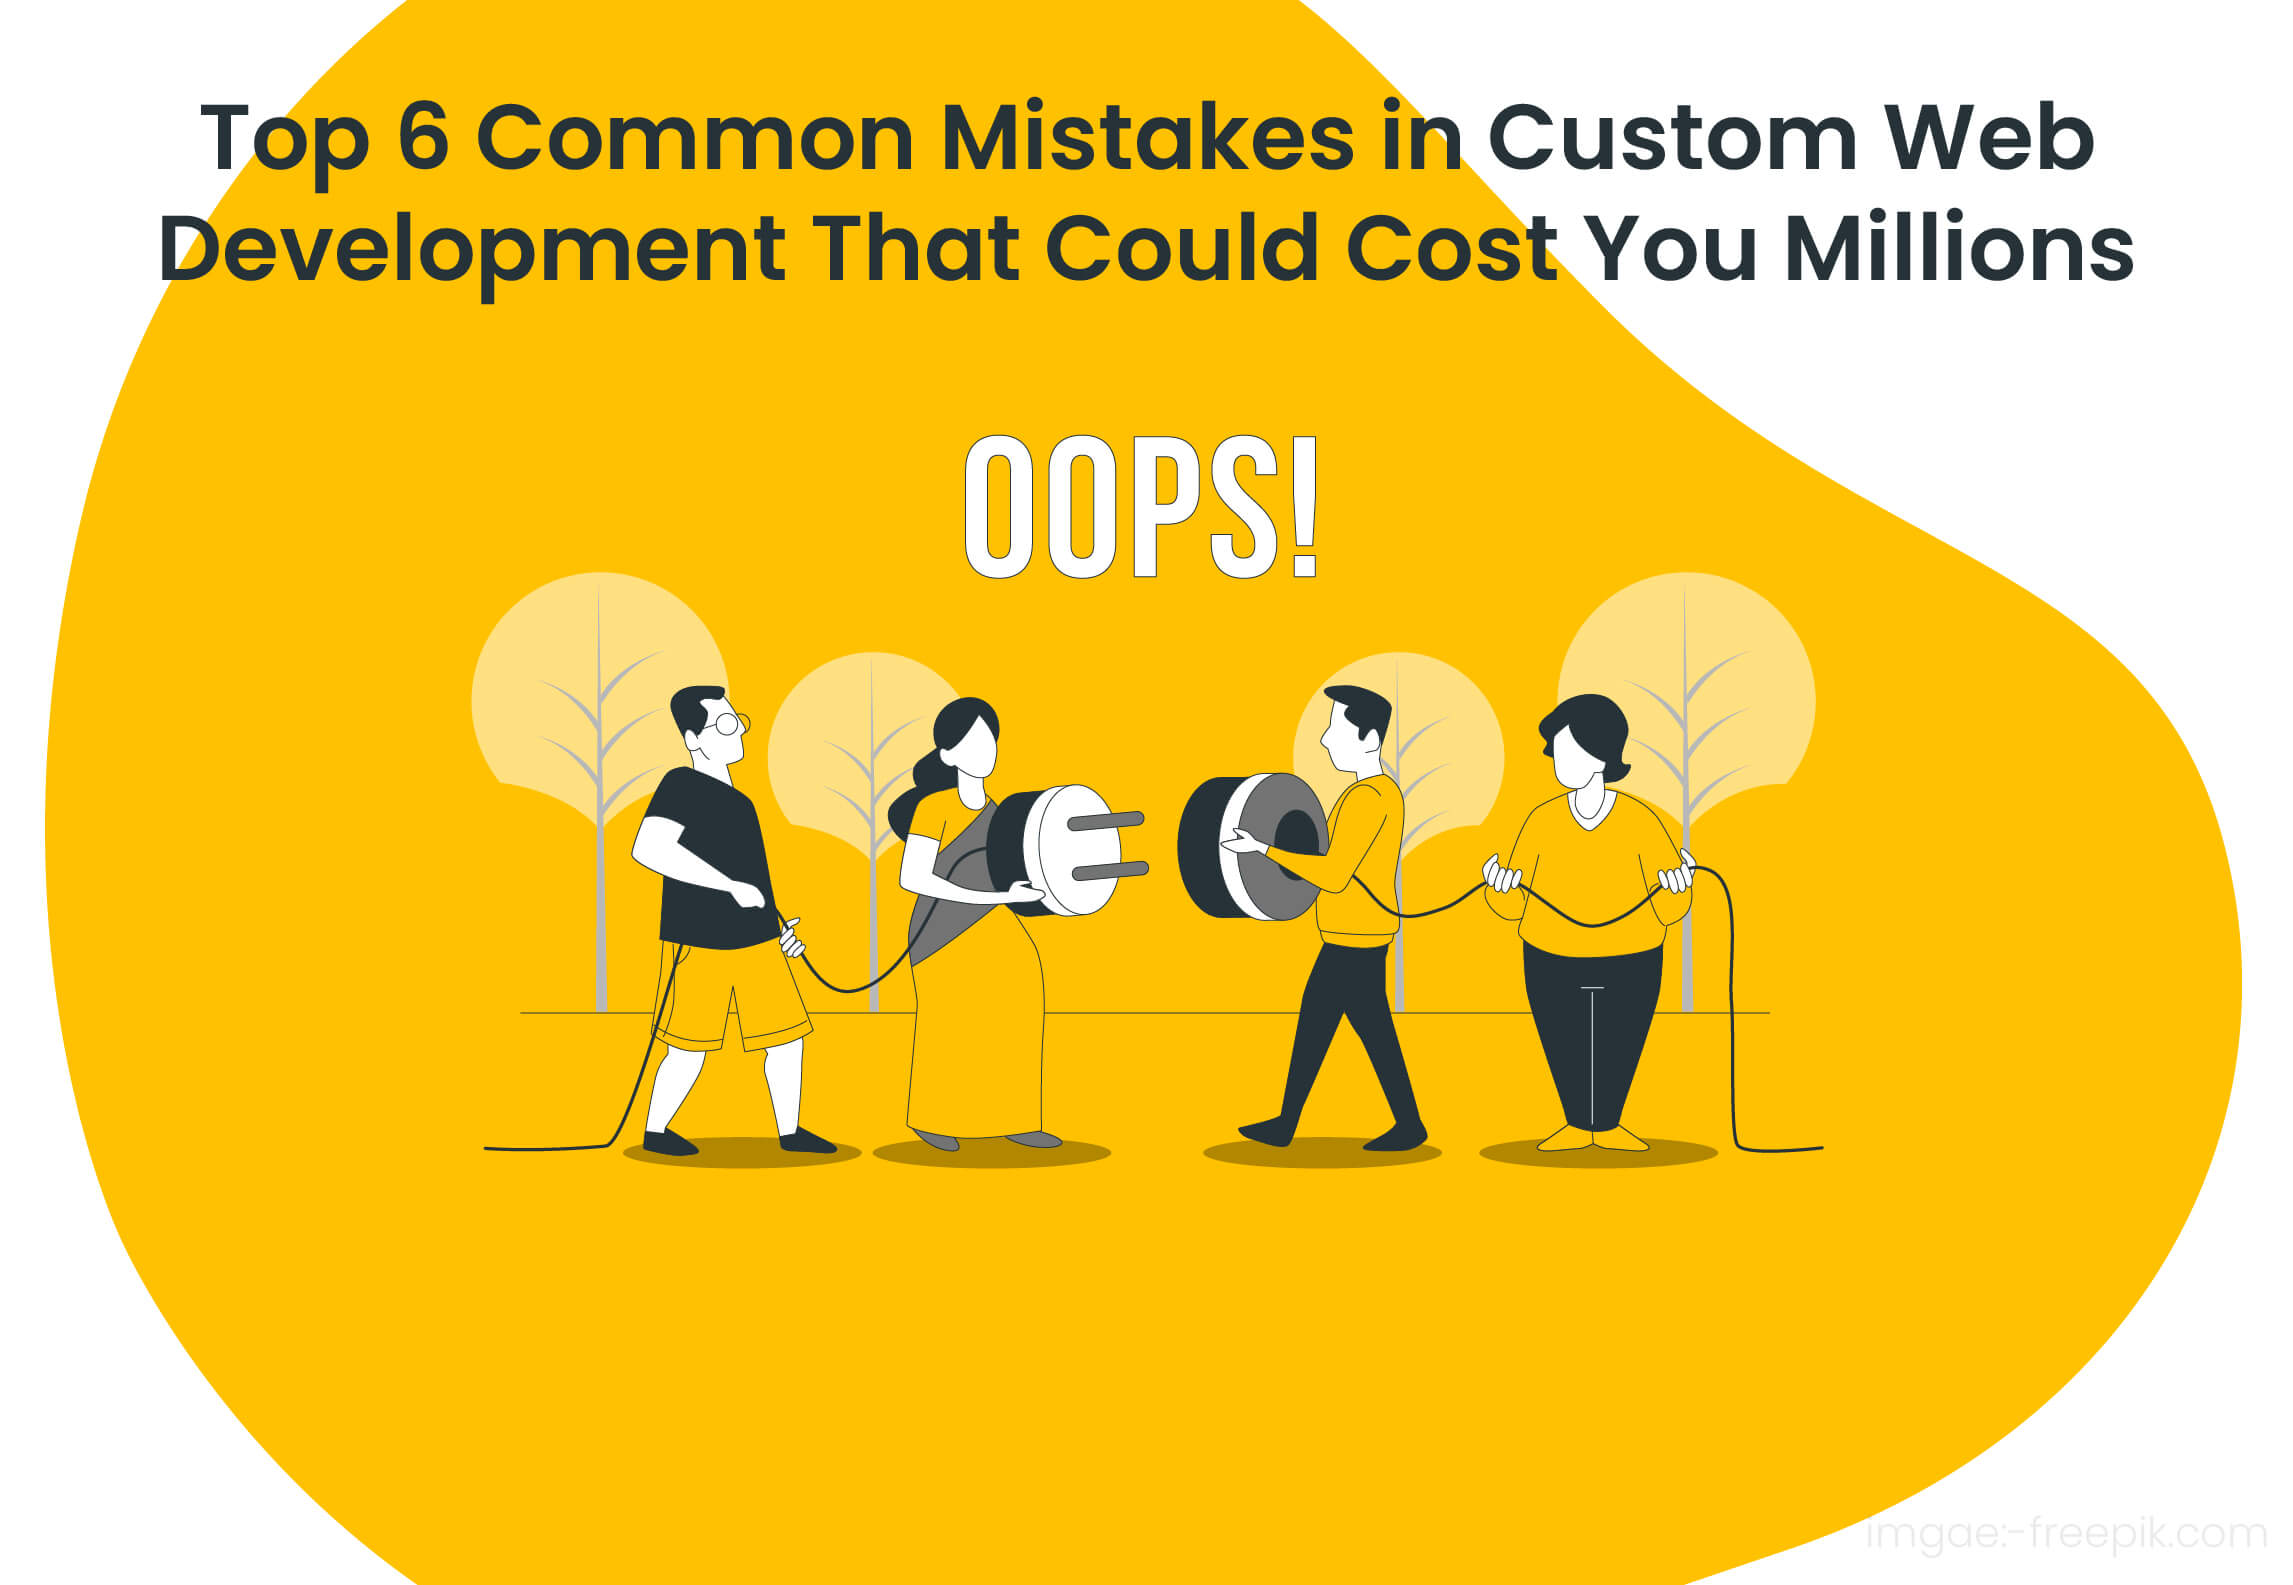 The Most Common Web Development Mistakes that Could Cost You Millions.